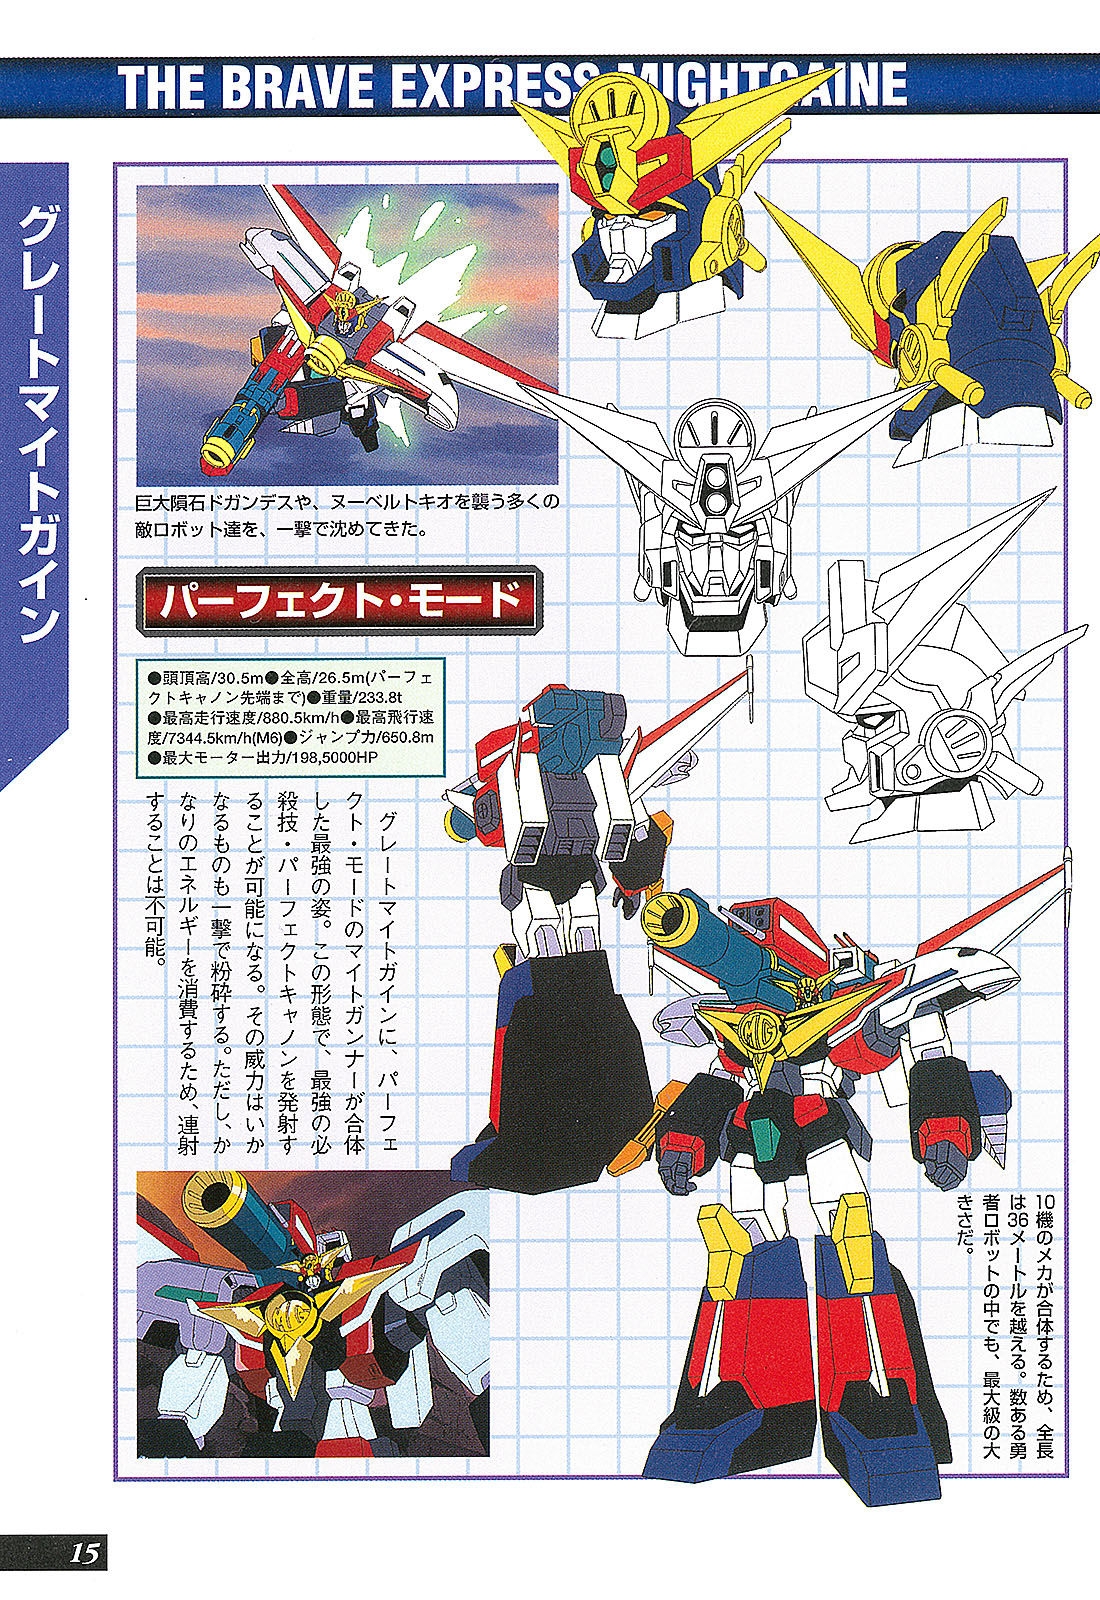 Dengeki Hobby Books - Data Collection No.11 - The Brave Express Might Gaine 16